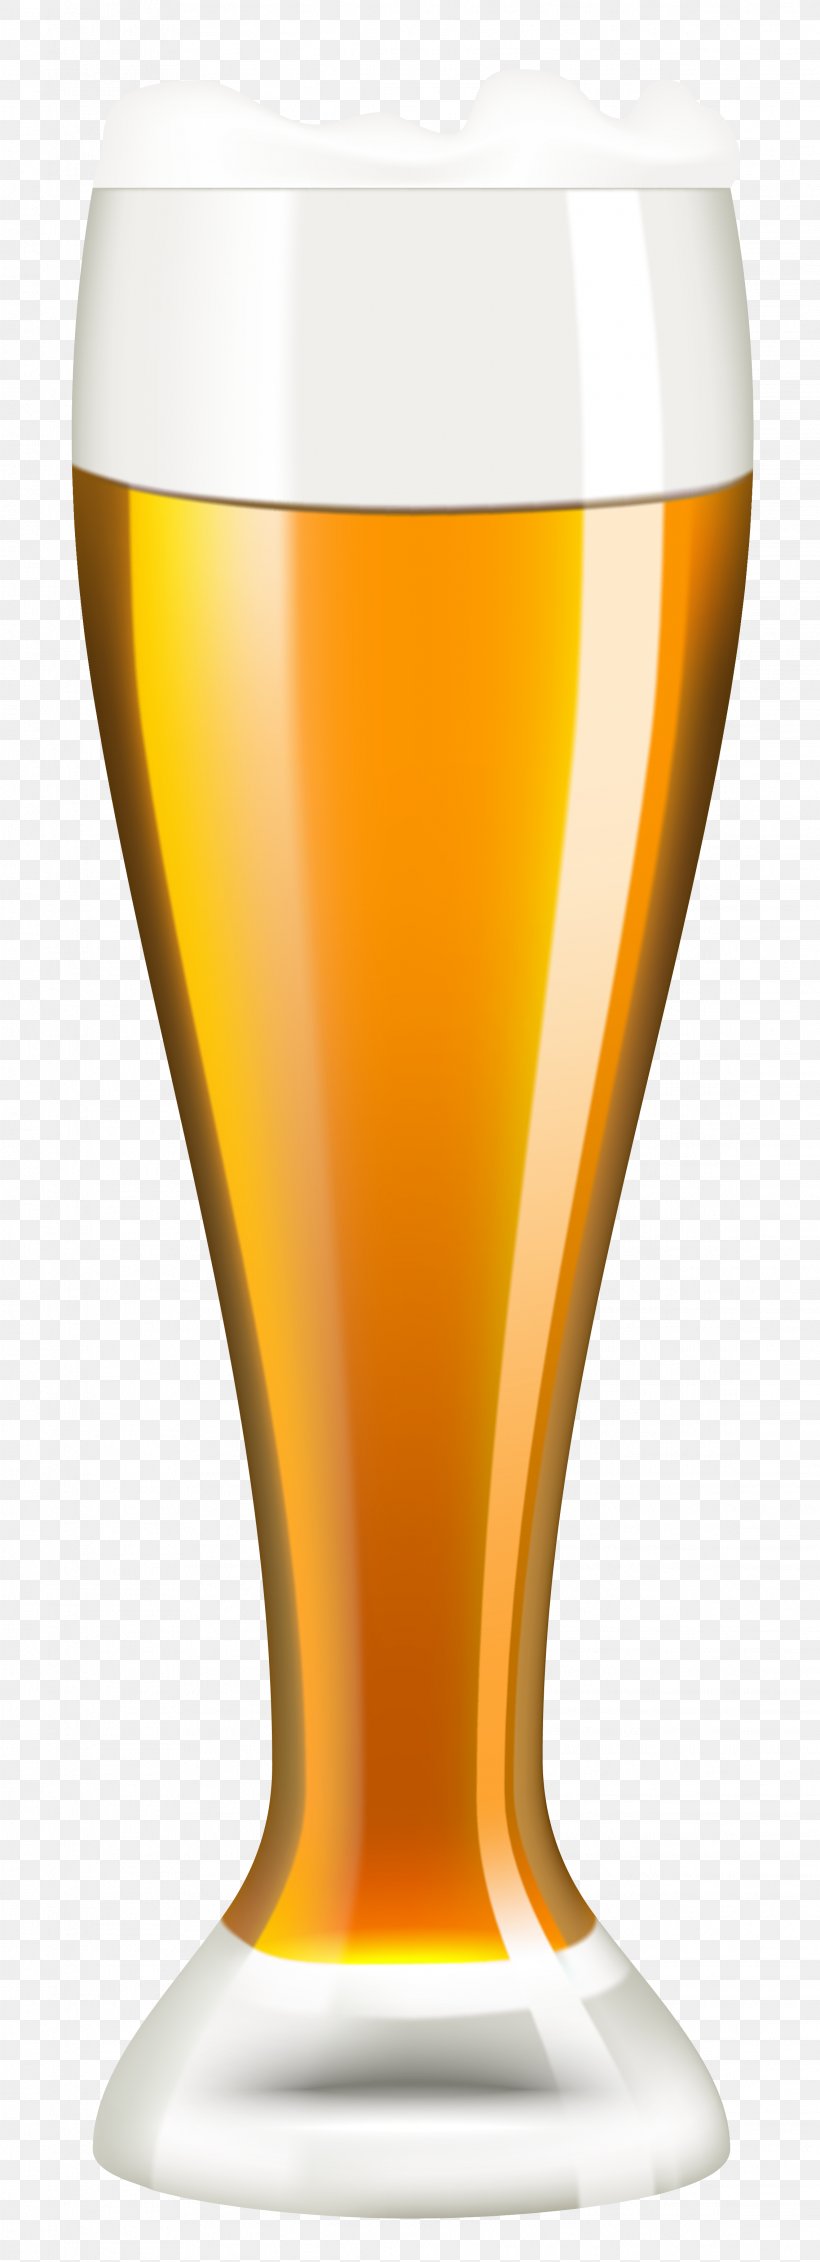 Beer Glassware Cocktail Oktoberfest, PNG, 2274x6274px, Beer, Beer Bottle, Beer Glass, Beer Glasses, Beer Pong Download Free